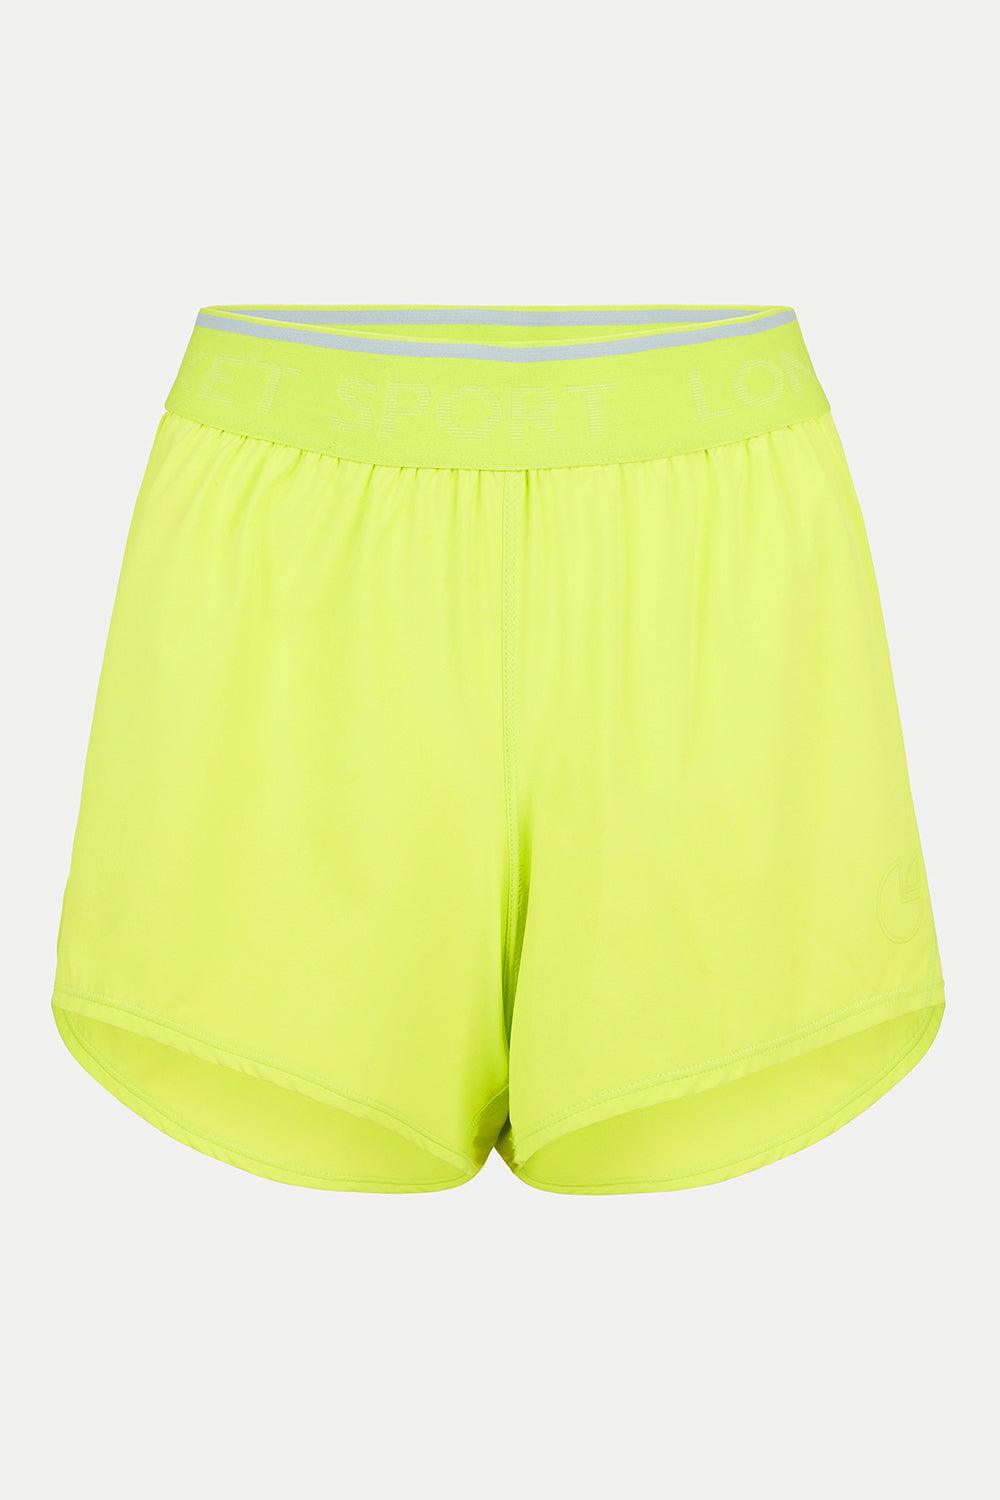 HeyNuts My Pace Running Shorts for Women, Mid Waisted Reflective Athletic  Shorts Lined Workout Shorts 3 Dazzling Yellow XXS(00) : Clothing, Shoes &  Jewelry 